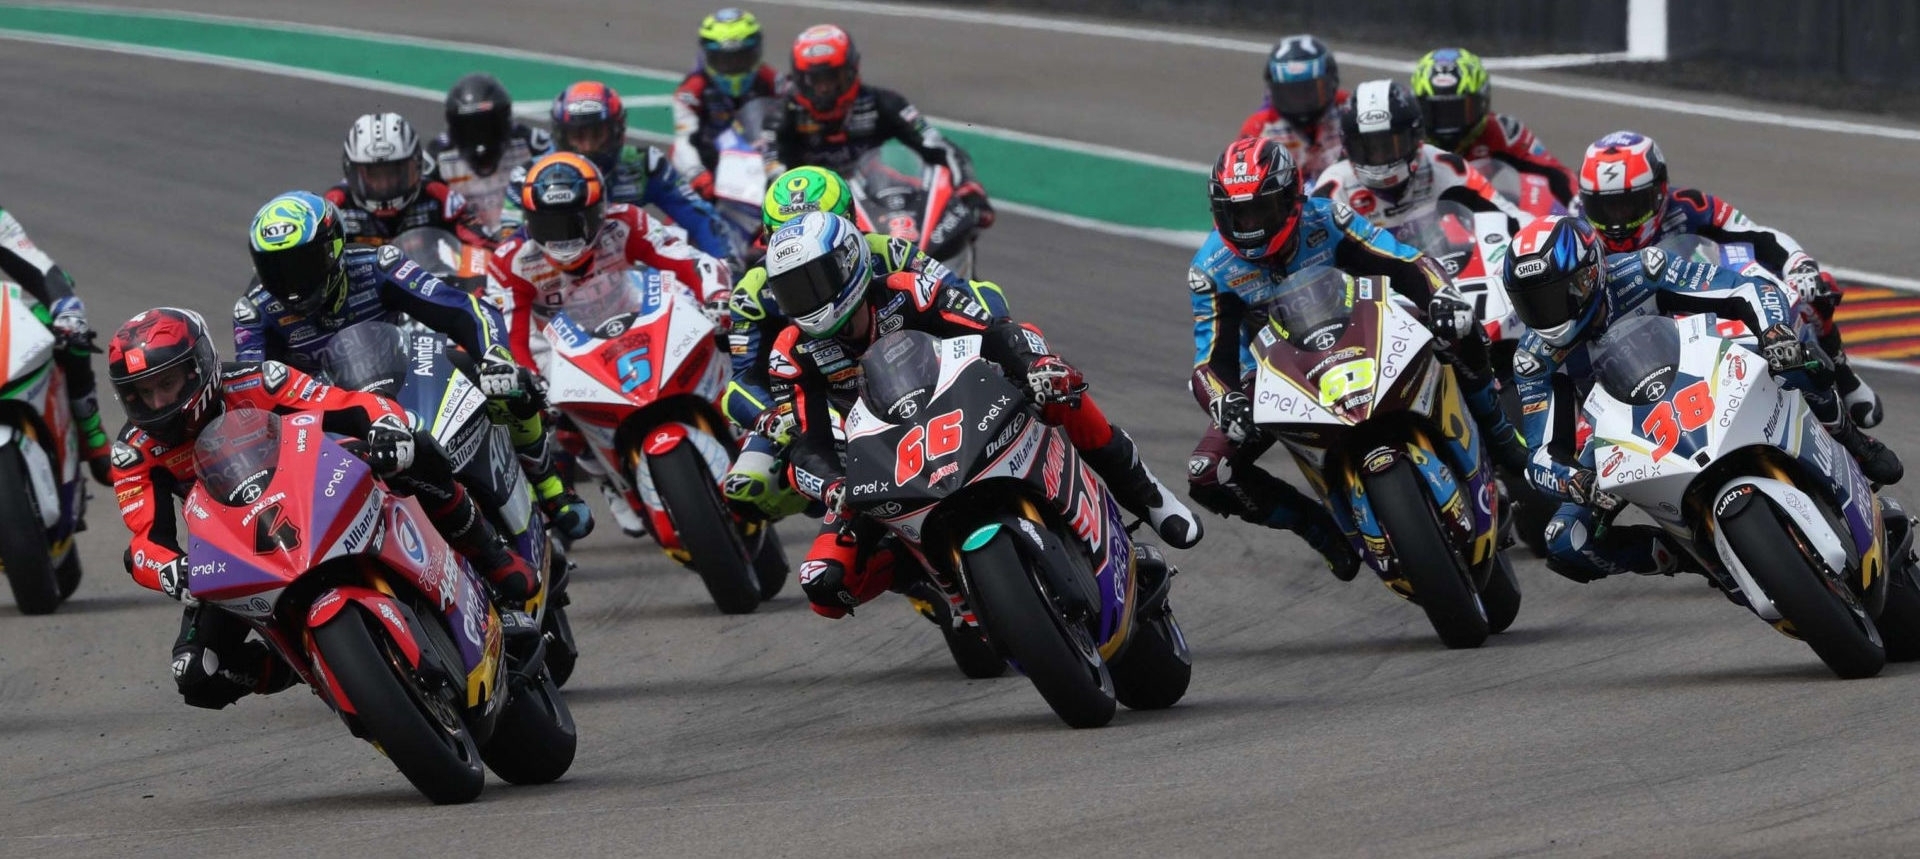 Motoe World Cup: 2020 Schedule Updated, Finalized